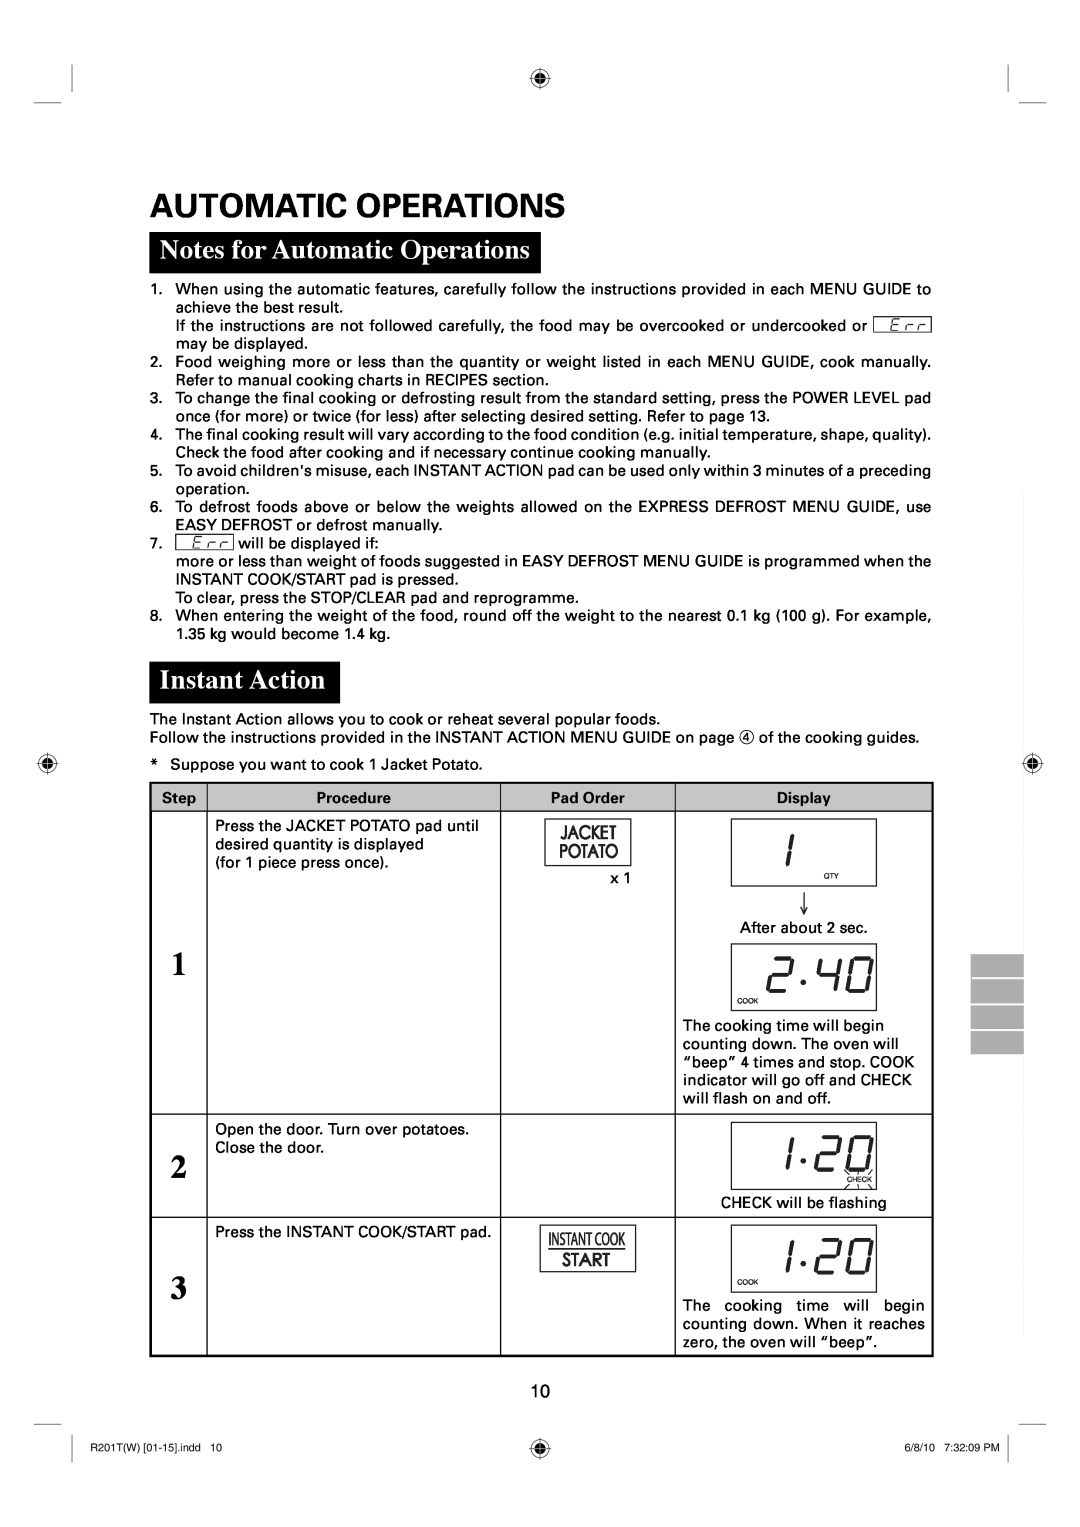 Sharp R-222T(W), R-201T(W) operation manual Notes for Automatic Operations, Instant Action 